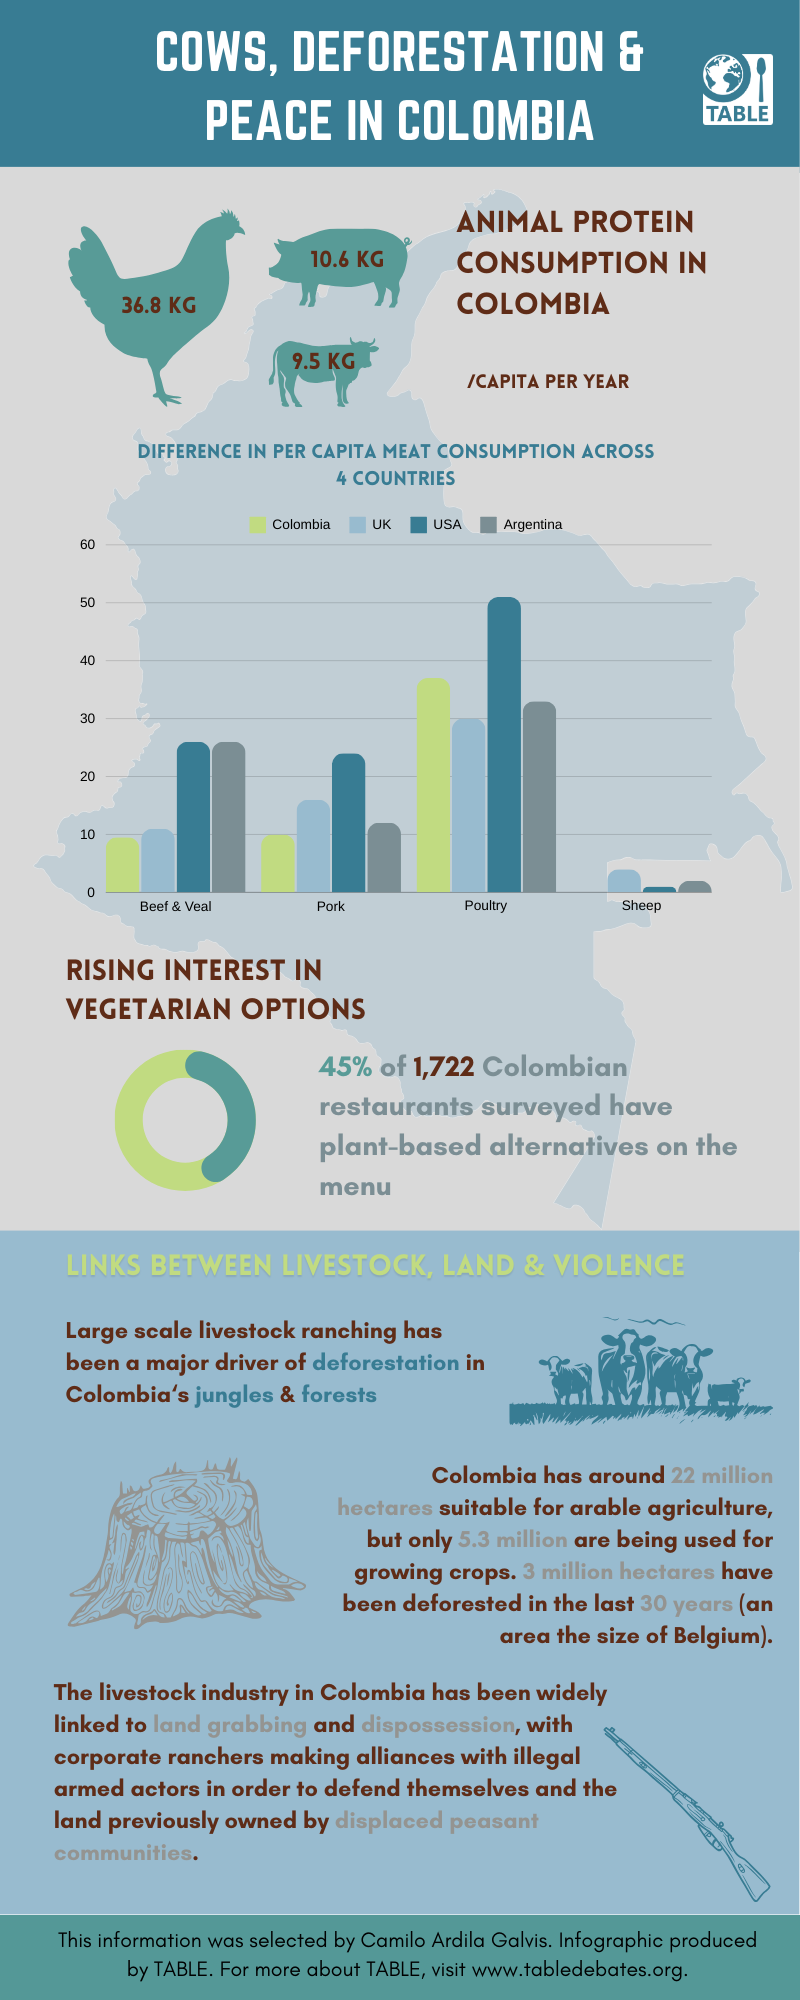 infographic about Cows, deforestation and peace in Colombia